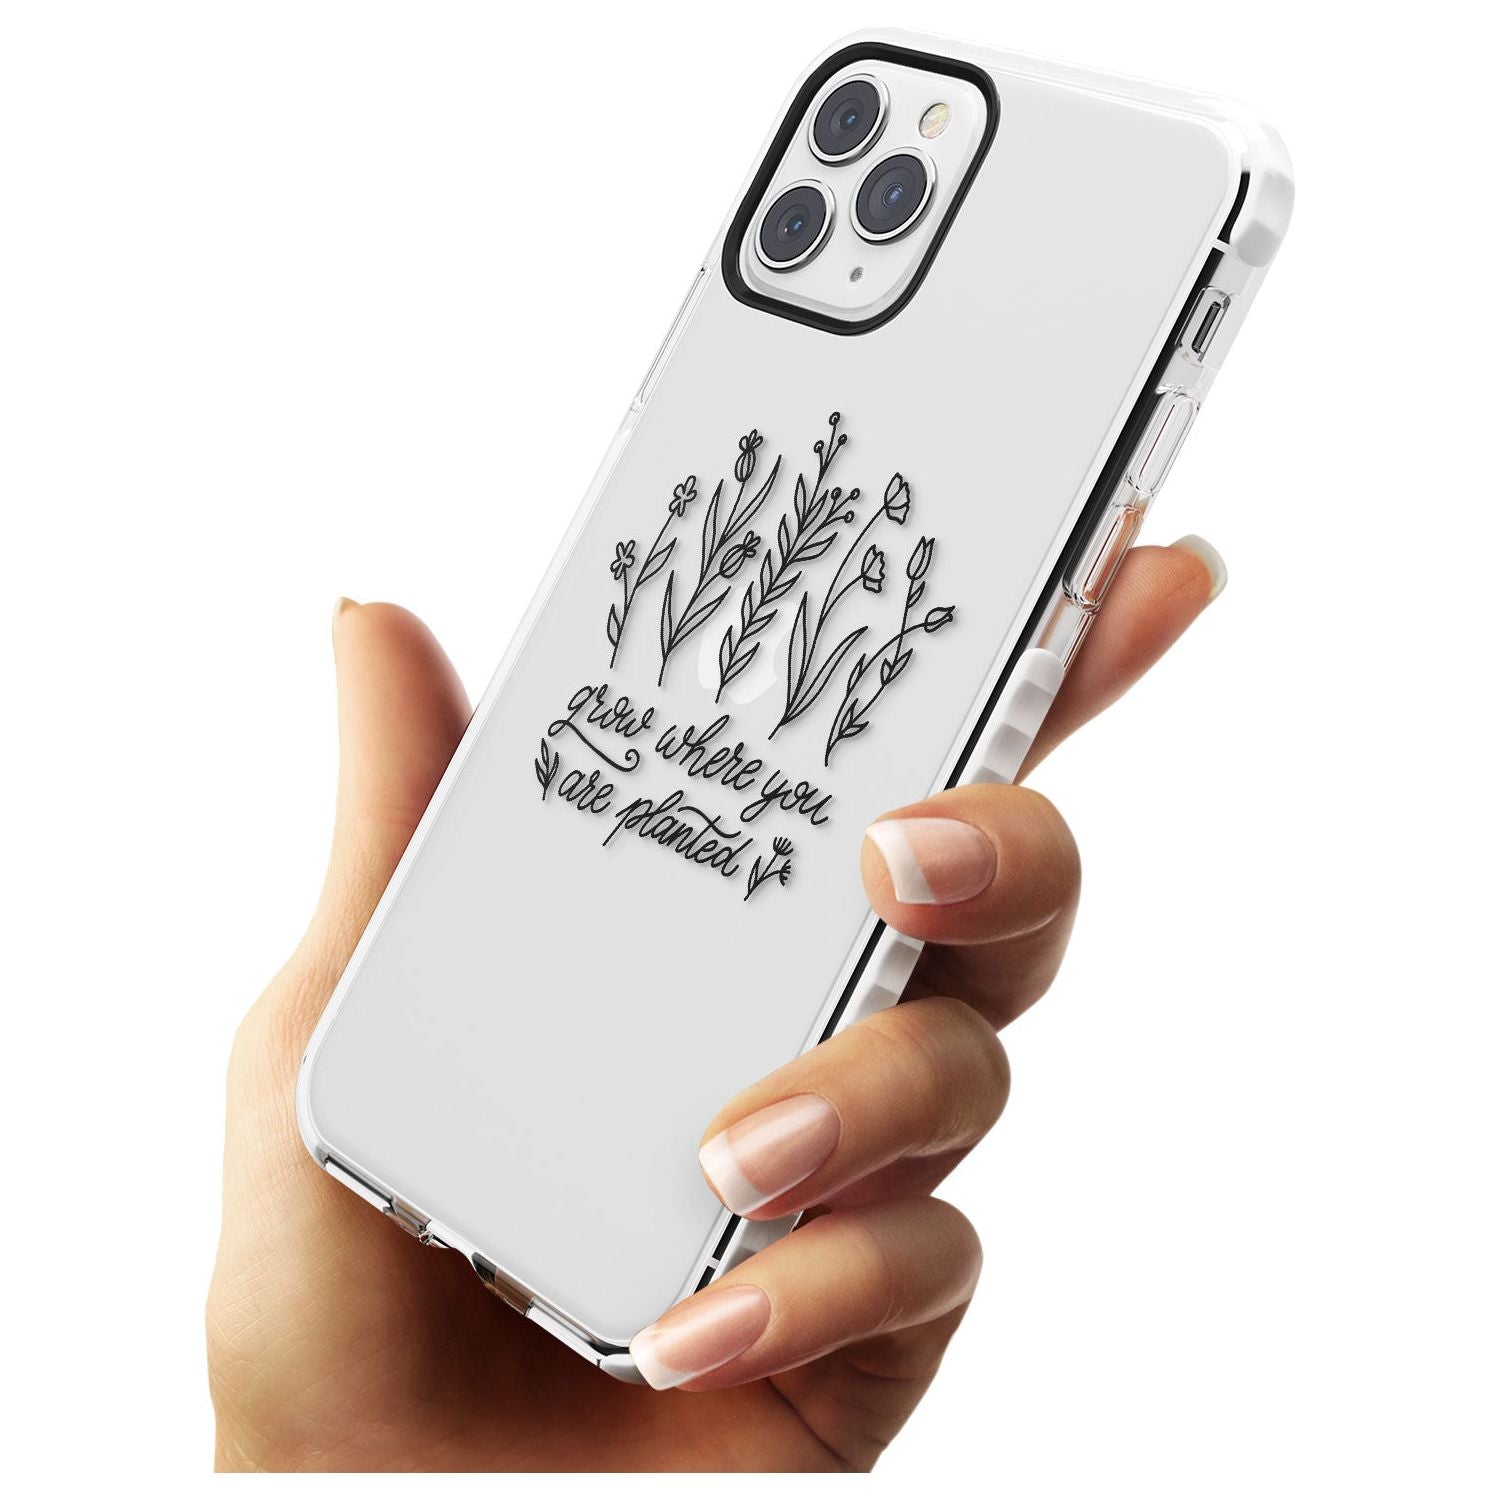 Grow where you are planted Impact Phone Case for iPhone 11 Pro Max